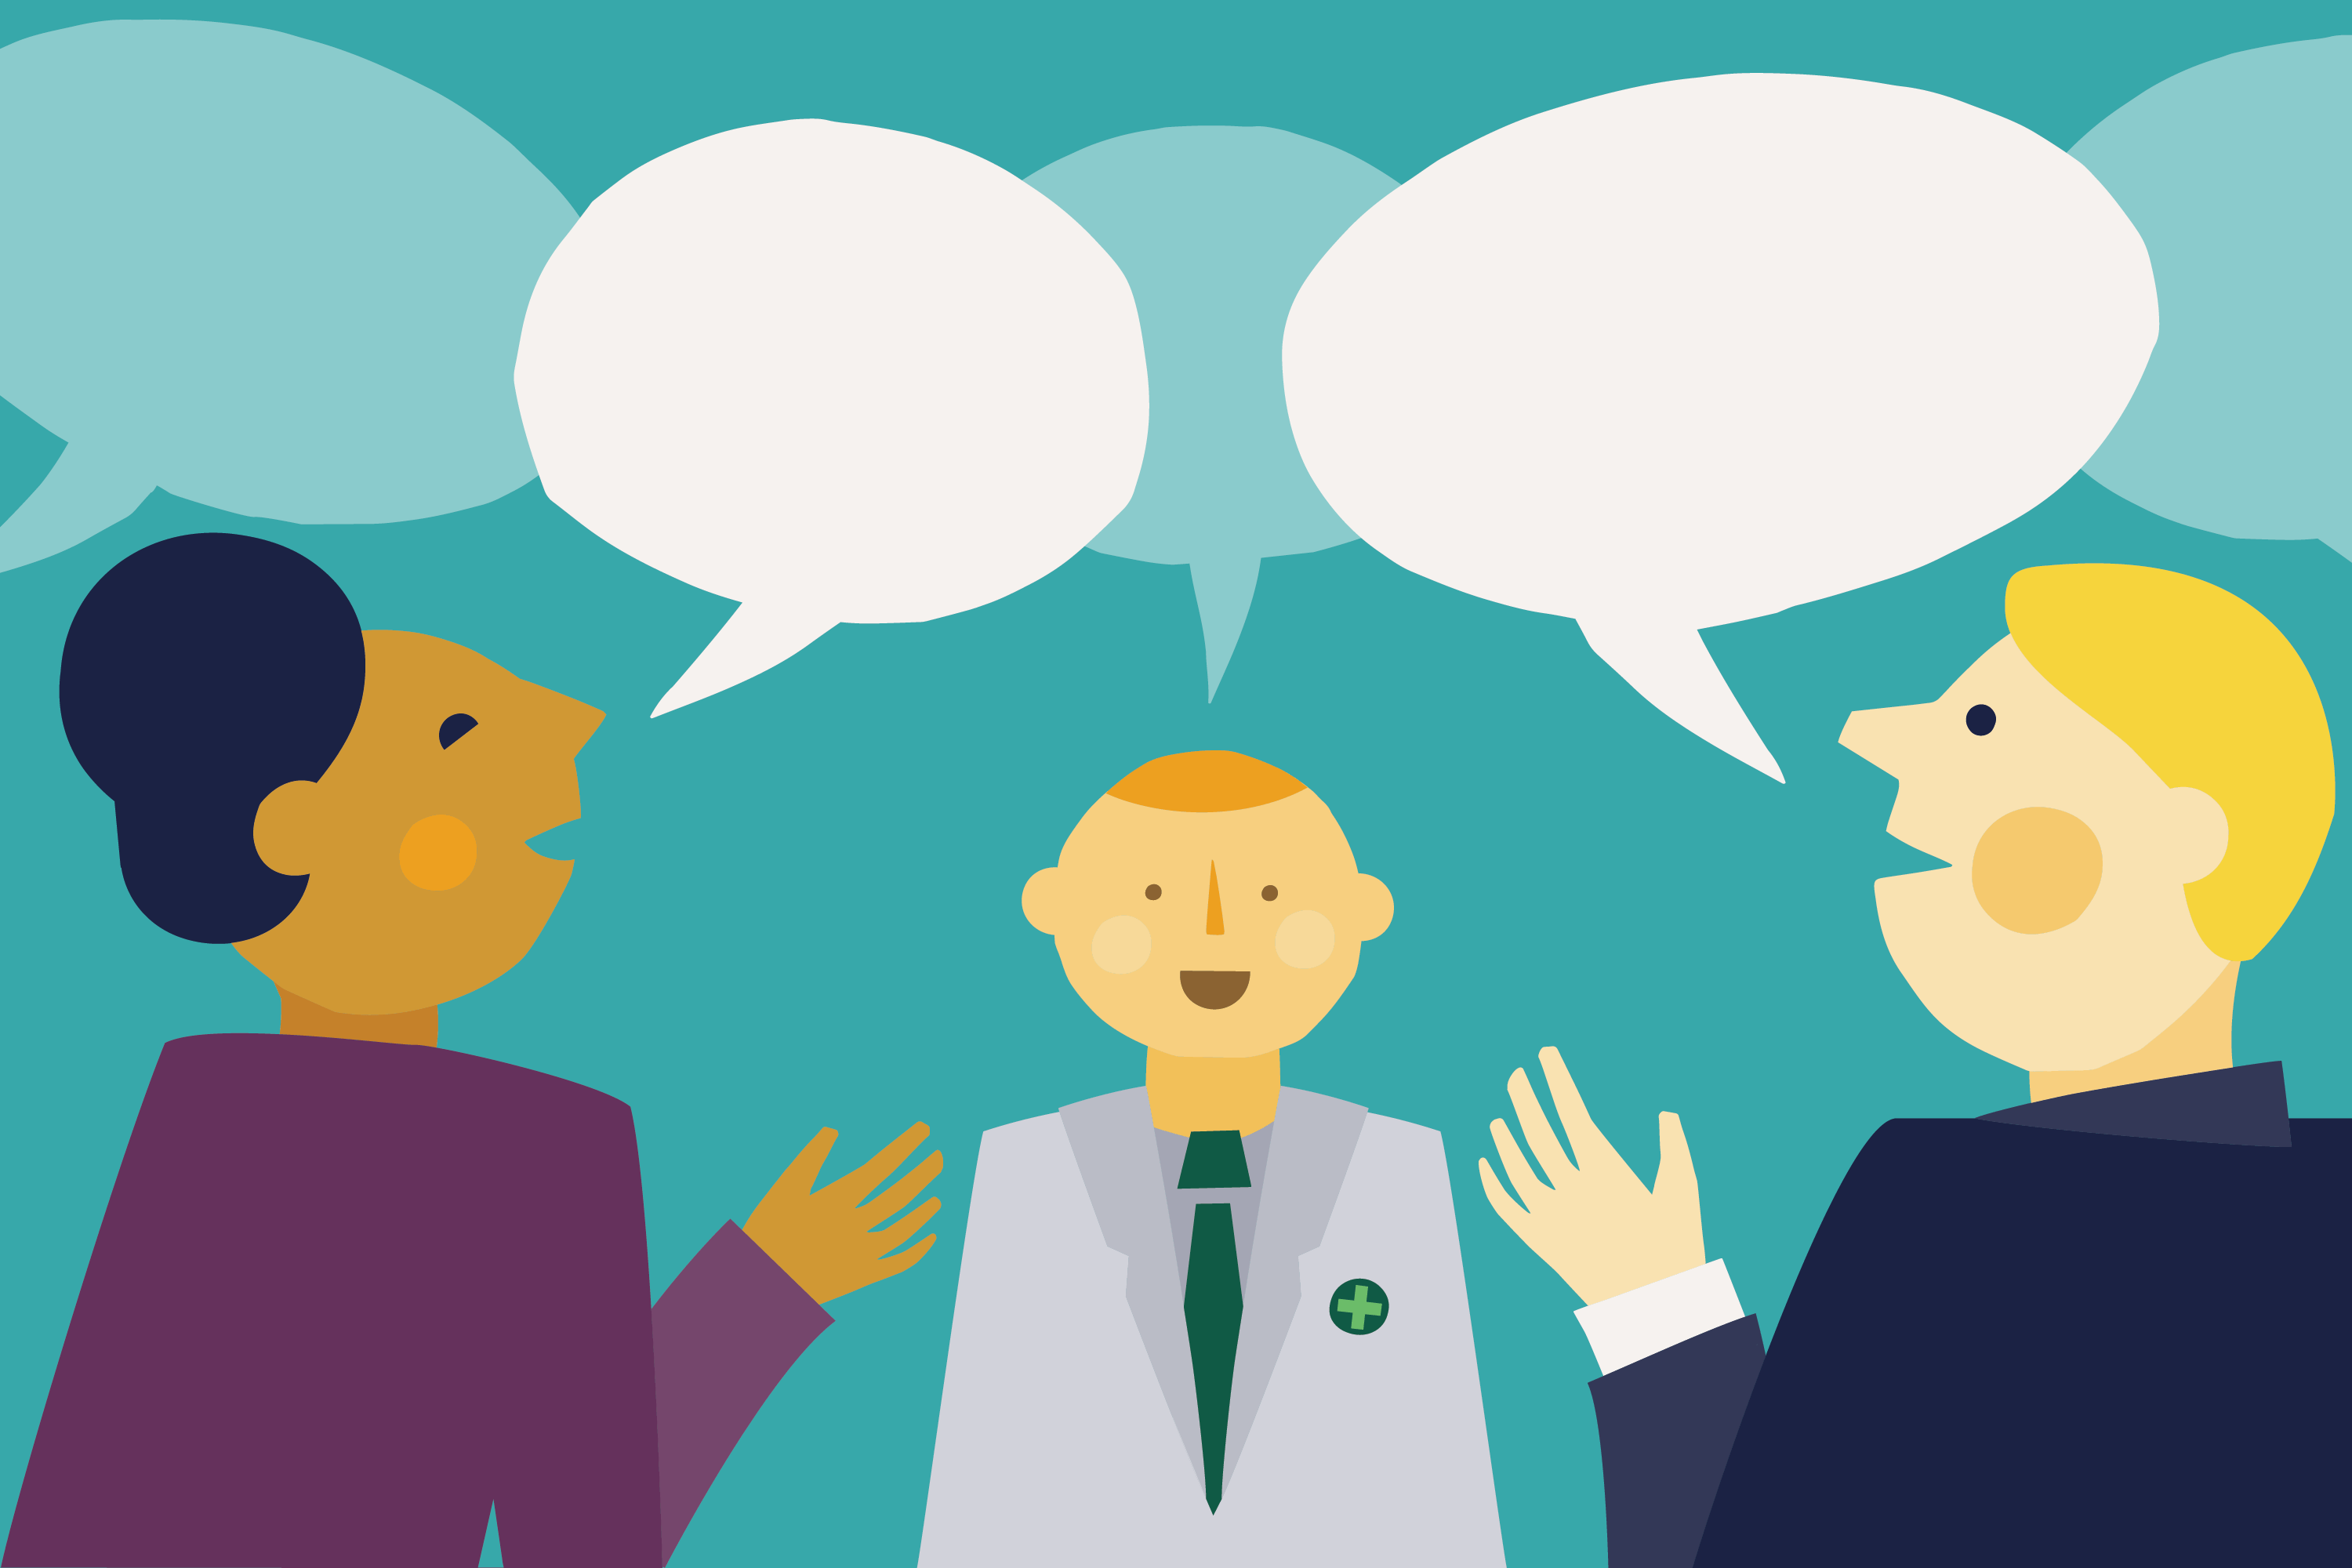 Illustration of three people in conversation with blank speech bubbles